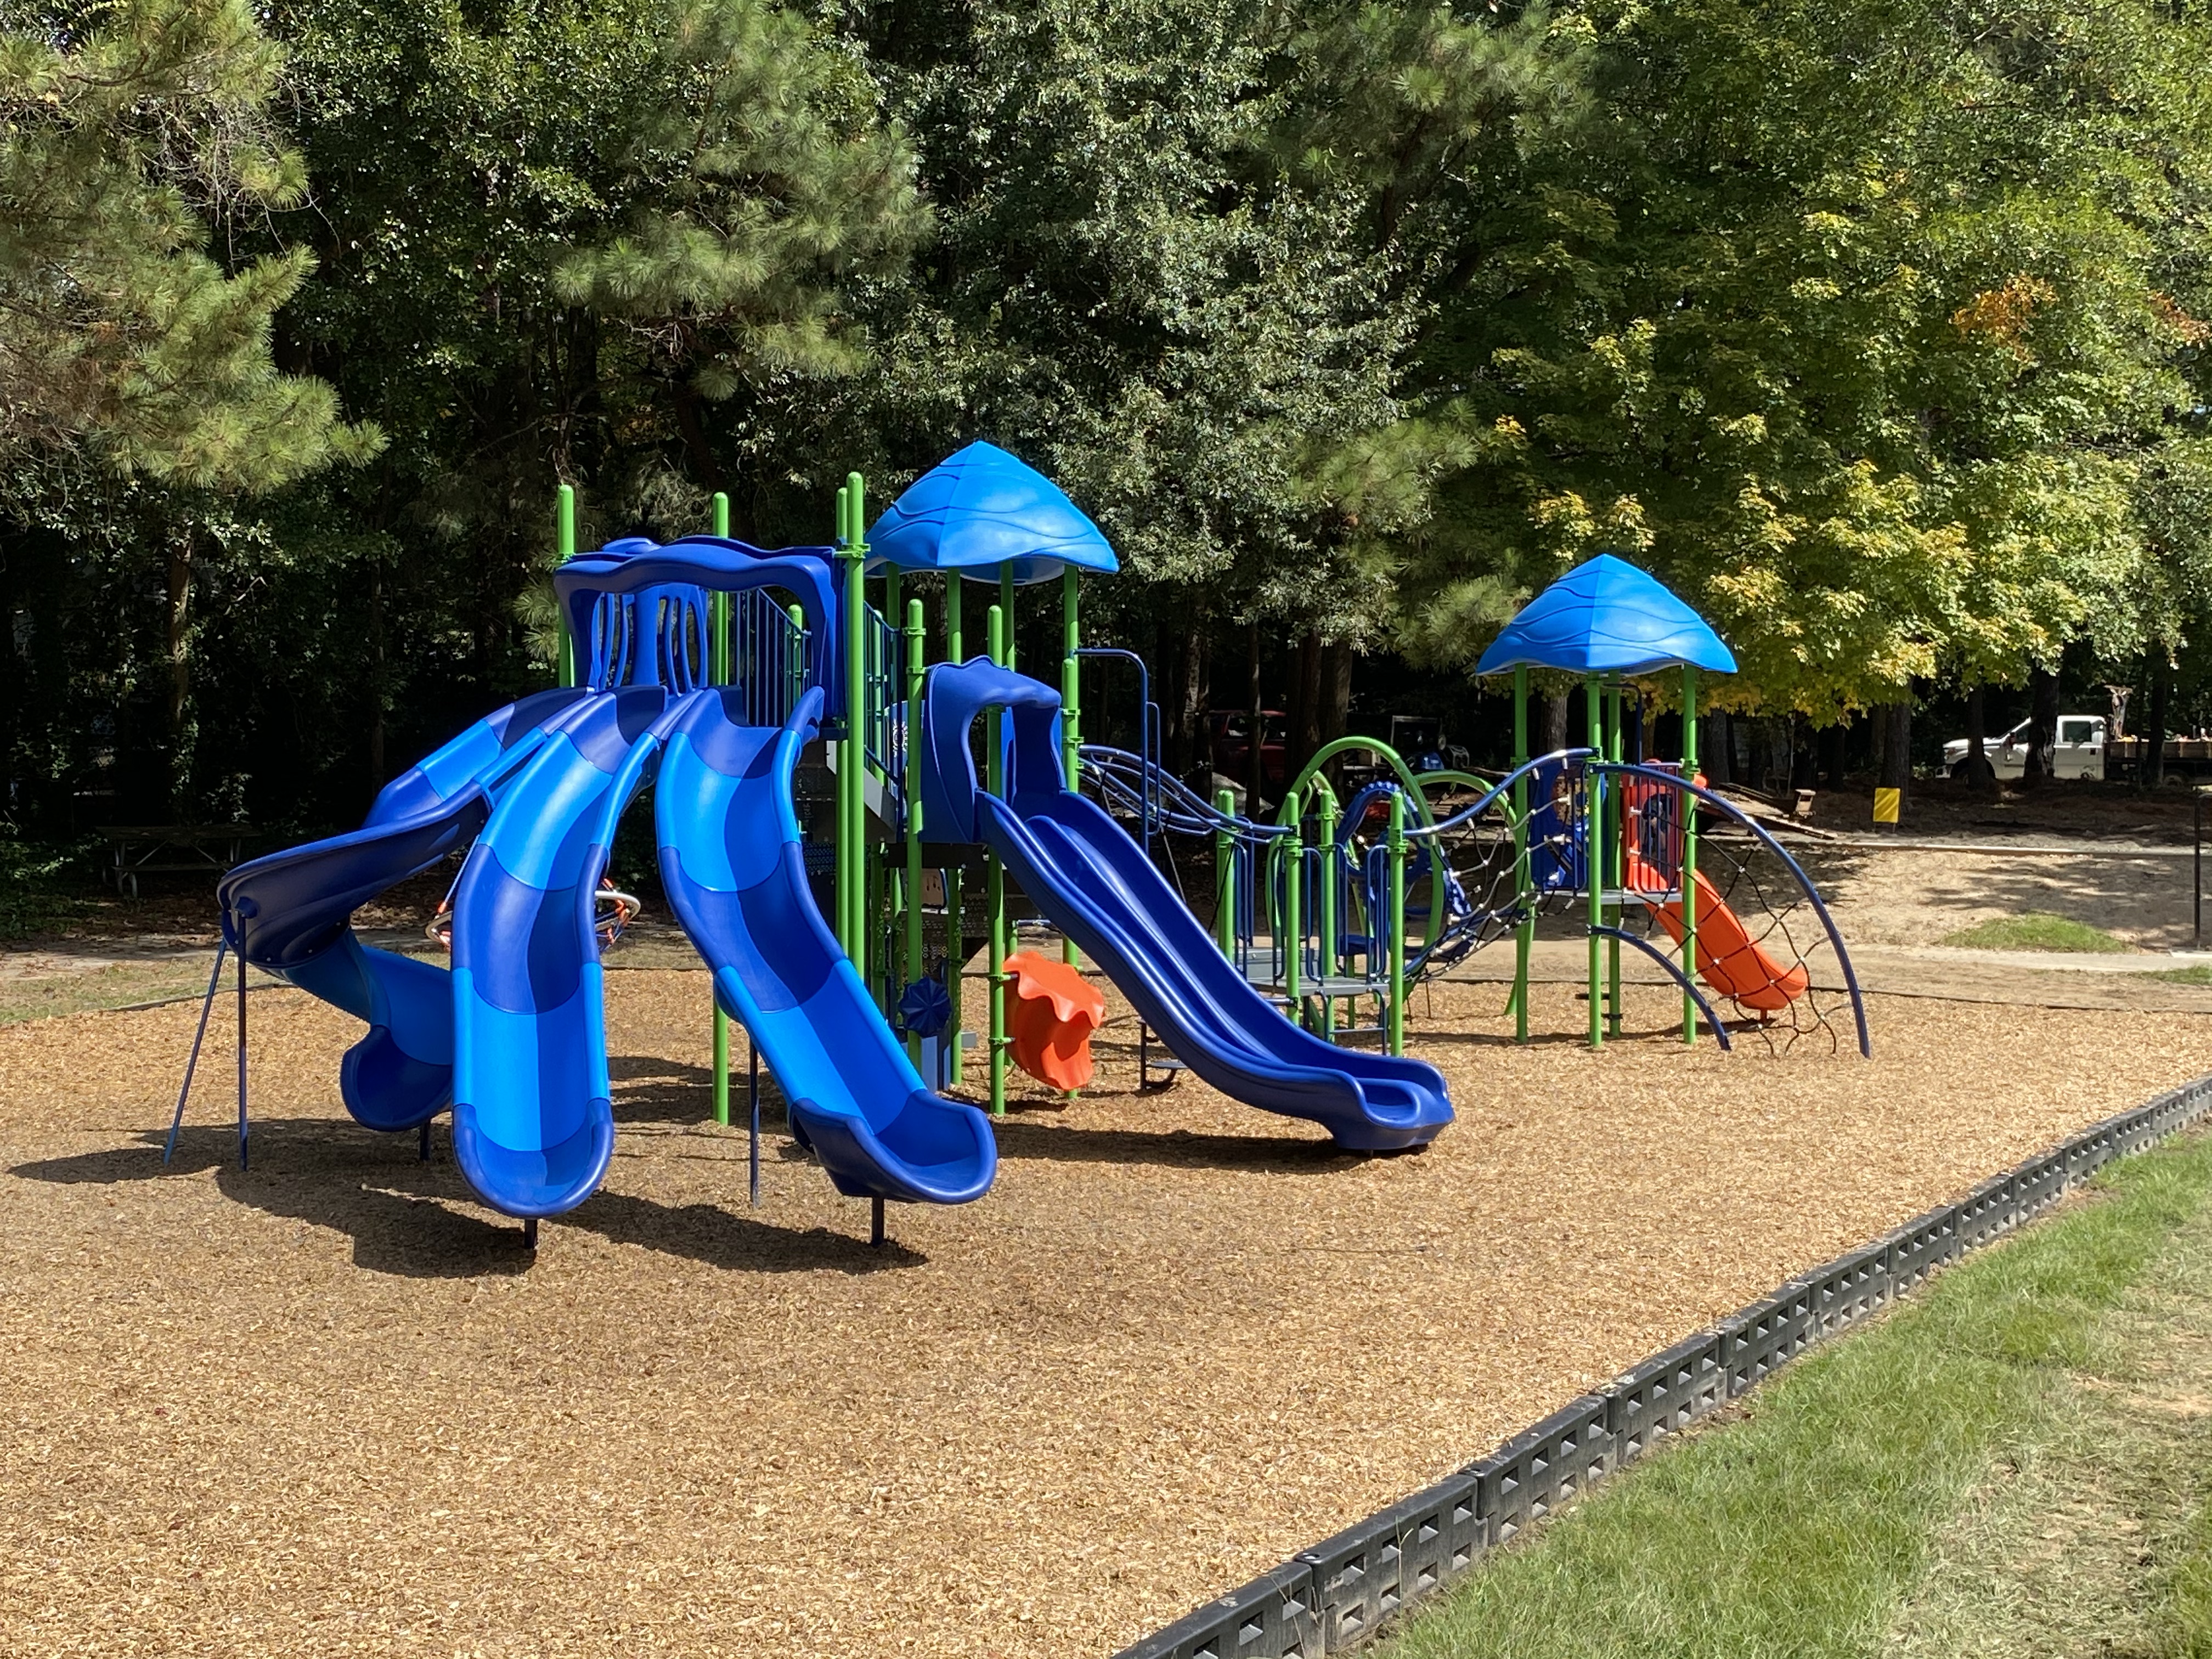 Blue, green, and orange playground during a sunny day